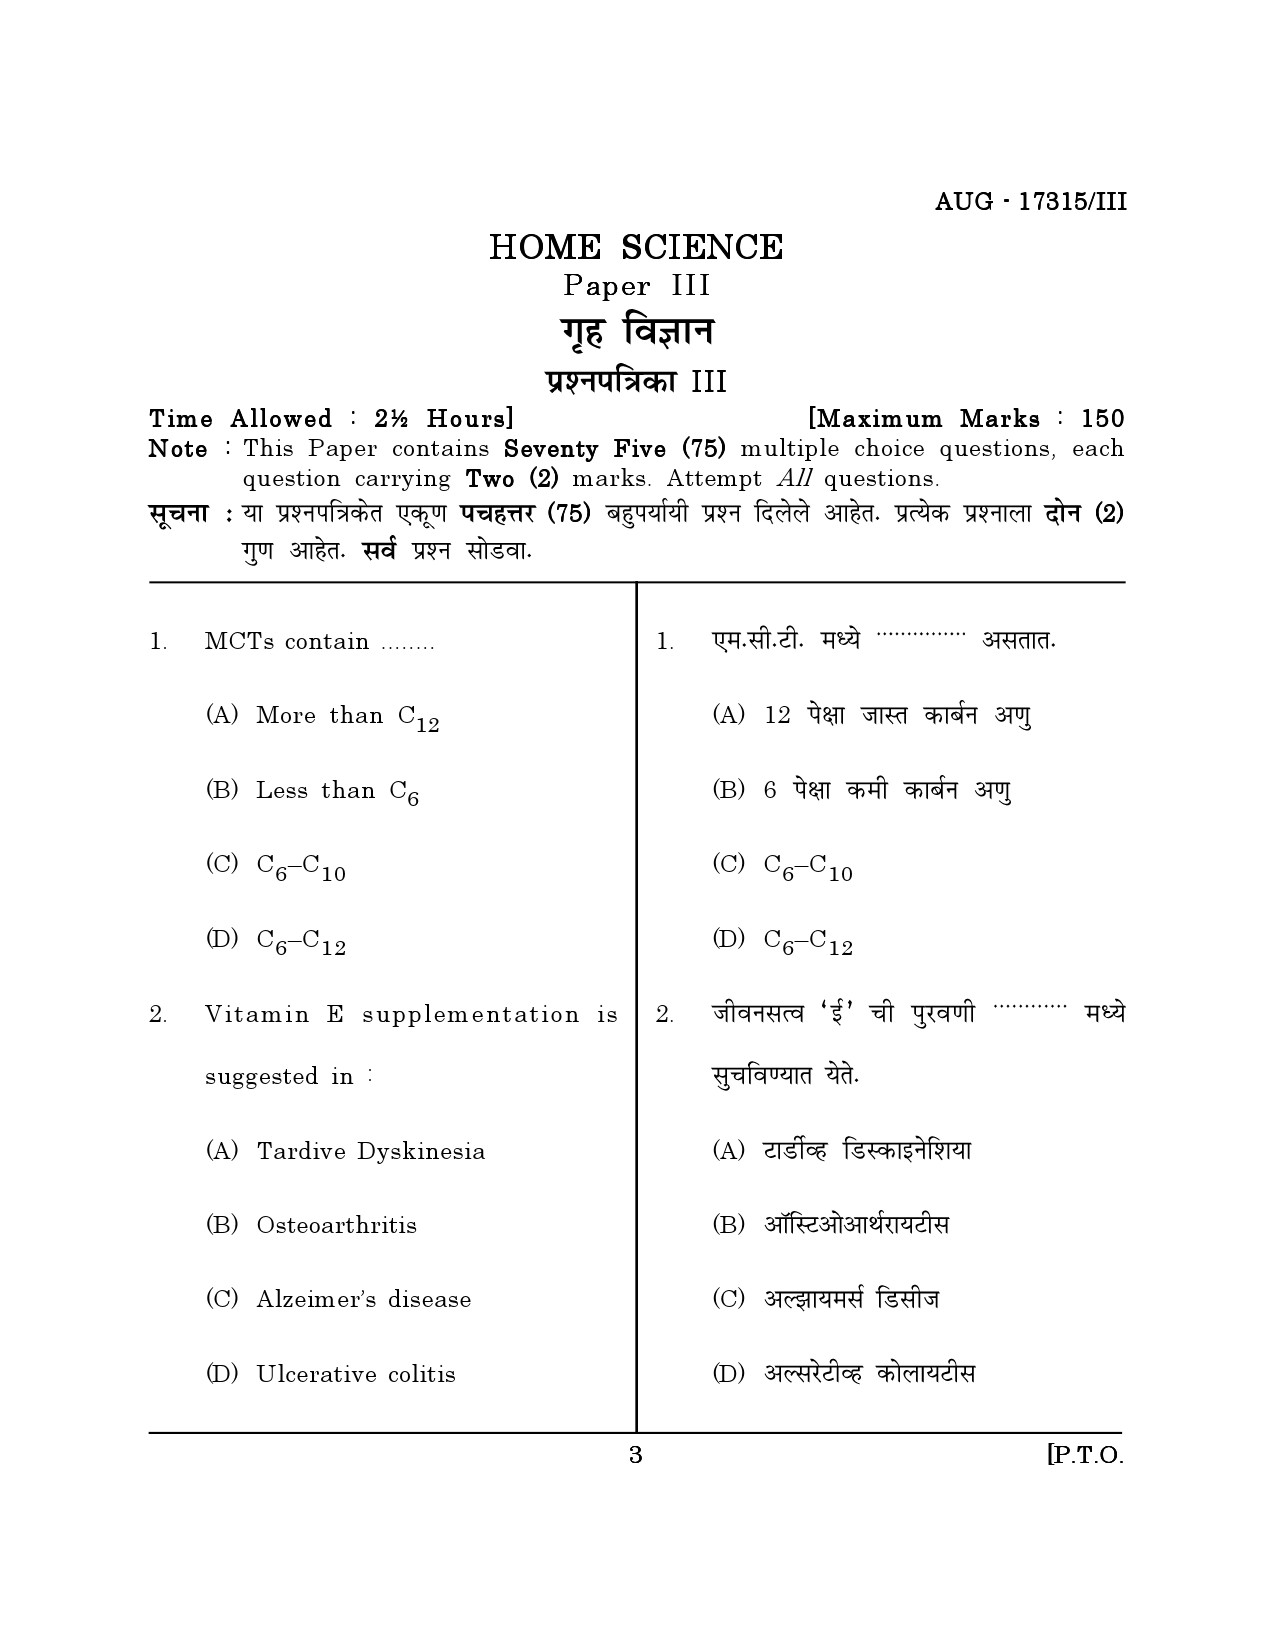 Maharashtra SET Home Science Question Paper III August 2015 2